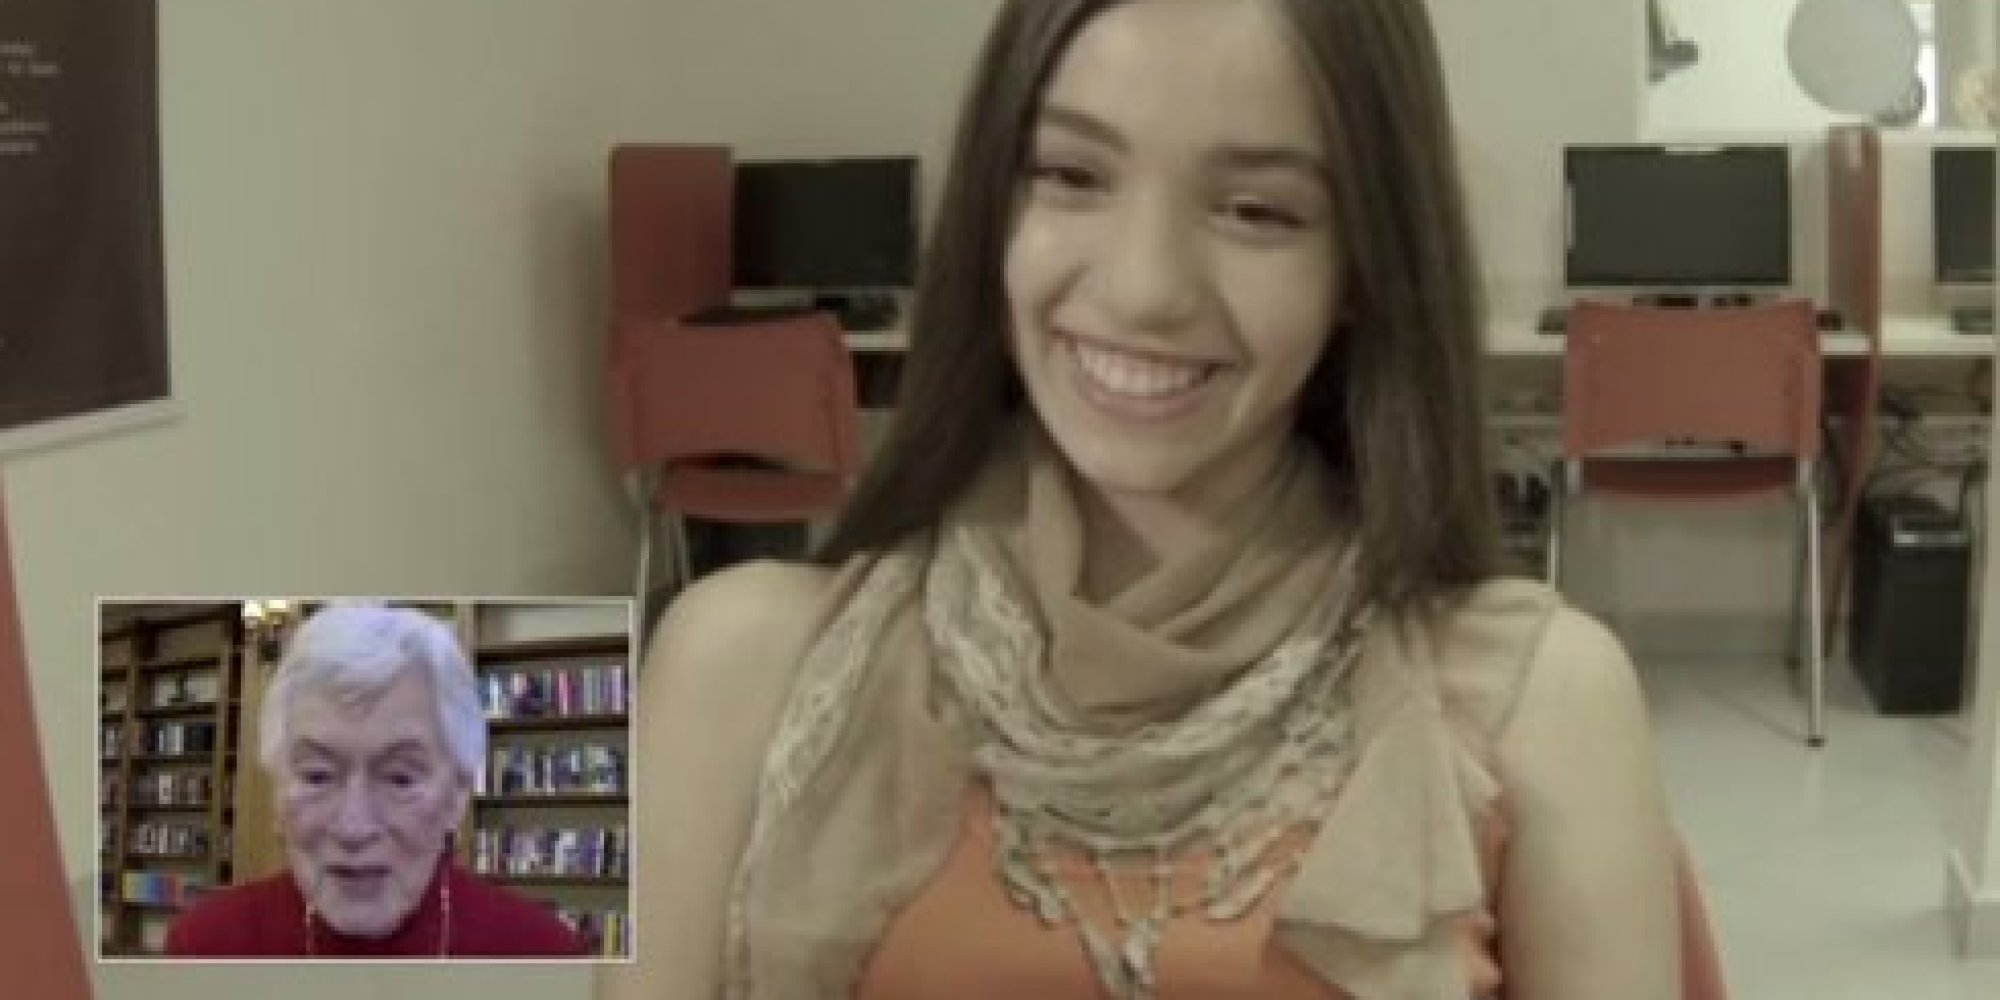 Brazilian Teens Video Chatting With Elderly Americans Is The Sweetest Thing